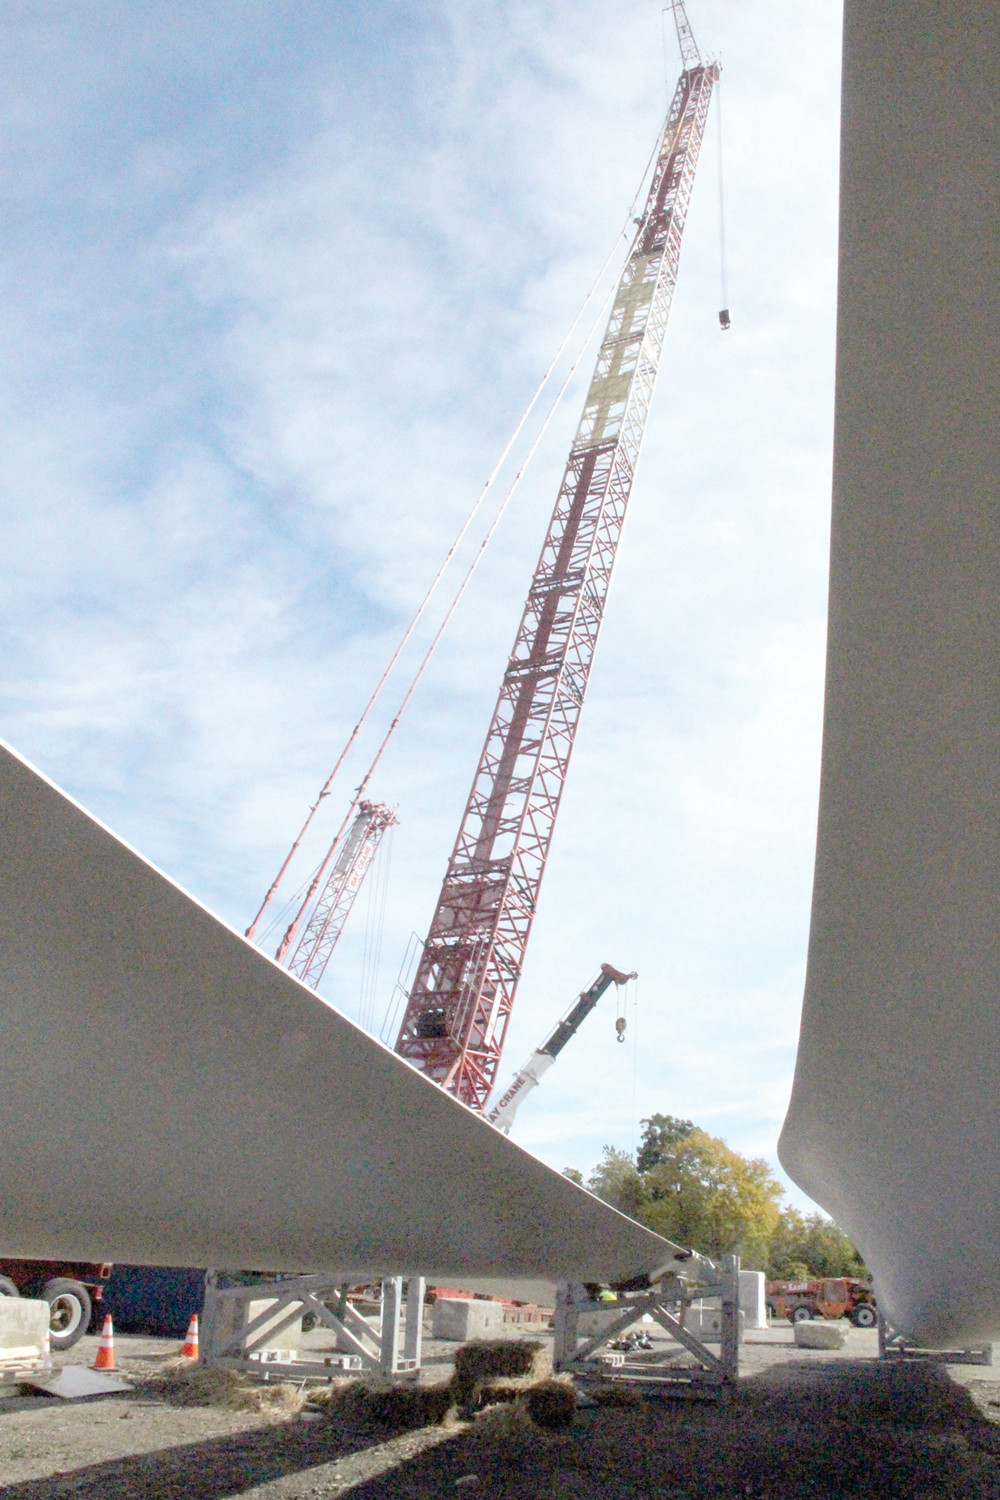 SKY HIGH: As seen from beneath the blades to power the turbine, a crane stands ready to lift tower components into place.